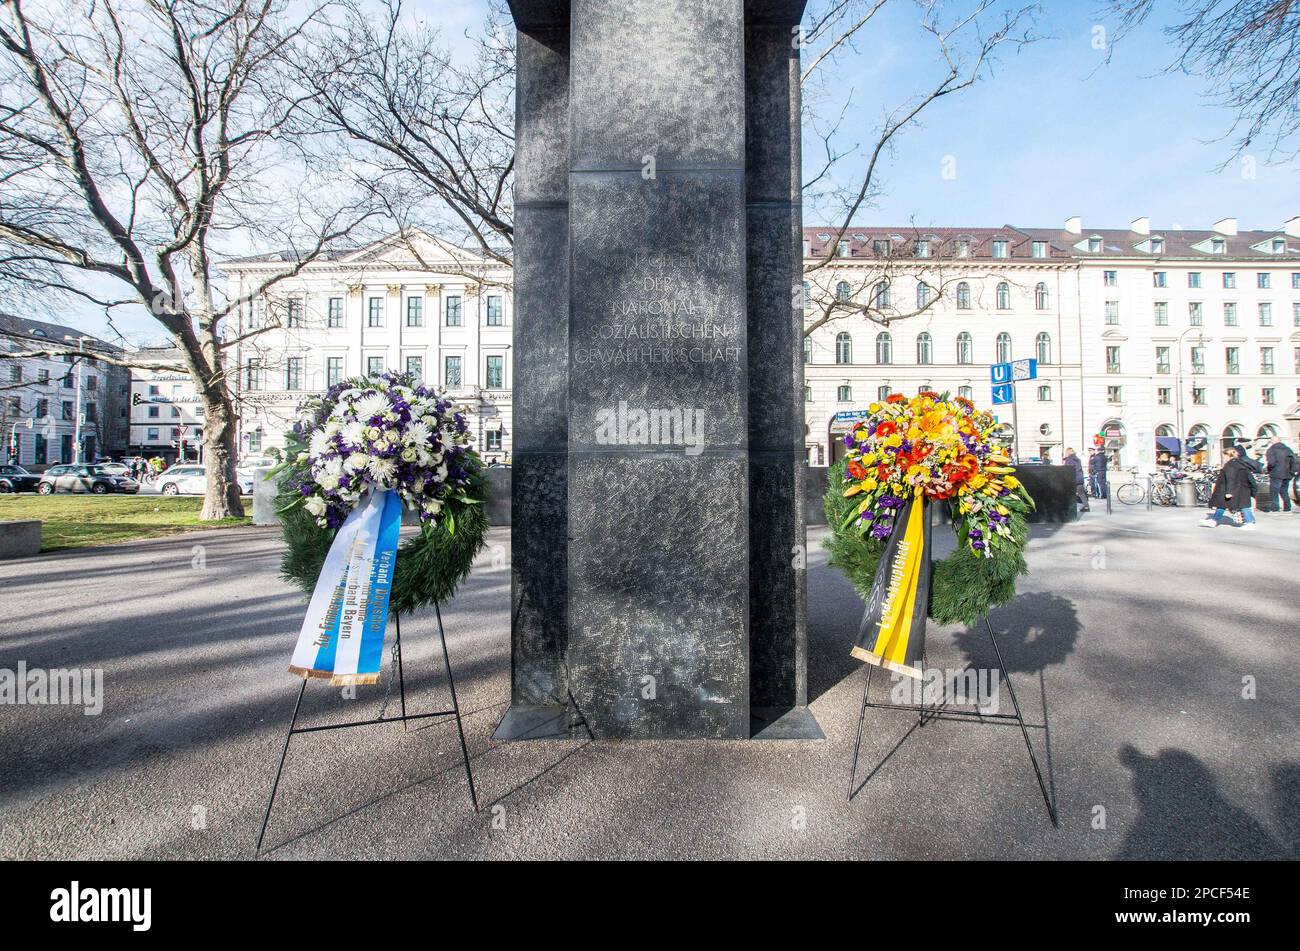 March 13, 2023, Munich, Bavaria, Germany: Assembling at the Platz der Opfer des Nationalsozialismus (Plaza for the Victims of National Socialism) in Munich, Germany, Director CAROLINE LINK, FC-Bayern President HERBERT HAINER, Munich Deputy Mayor KATRIN HABERSCHADEN of the Greens, and MEHMET DAIMAGÃœLER, Federal Commissioner Against Antiziganism assembled together to memorialize the 80th anniversary of the deportations of Sinti and Roma from Munich. Some research indicates the ultimate death toll of Roma to be between 1.5 and 2 million with many along the way having been funneled into human exp Stock Photo